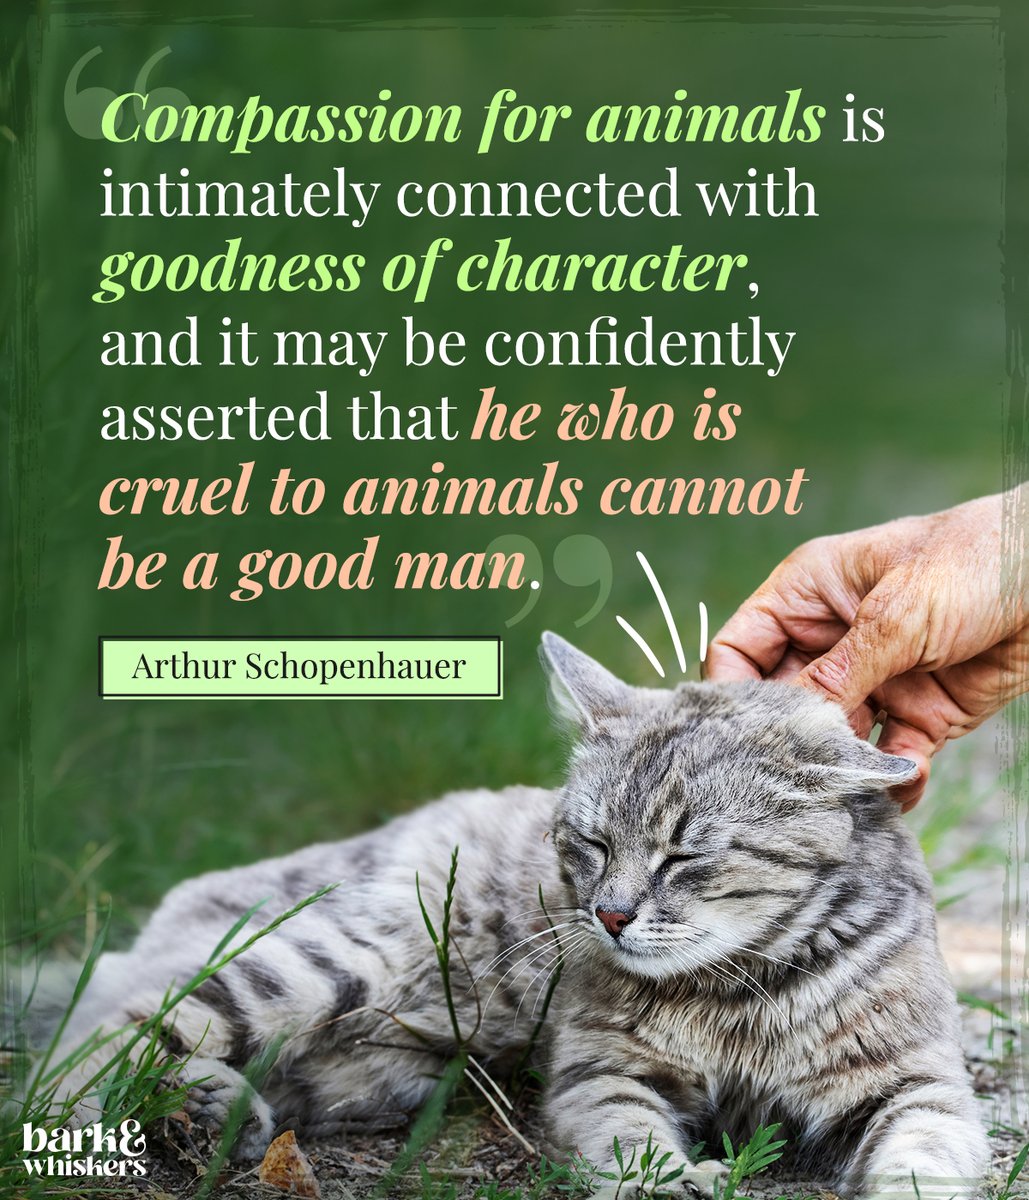 During #AnimalCrueltyAwarenessWeek, remember to be compassionate toward animals, no matter what. The way we treat them reflects our moral character. 🤝🌟 #BeCompassionate #RespectAllAnimals #barkandwhiskers